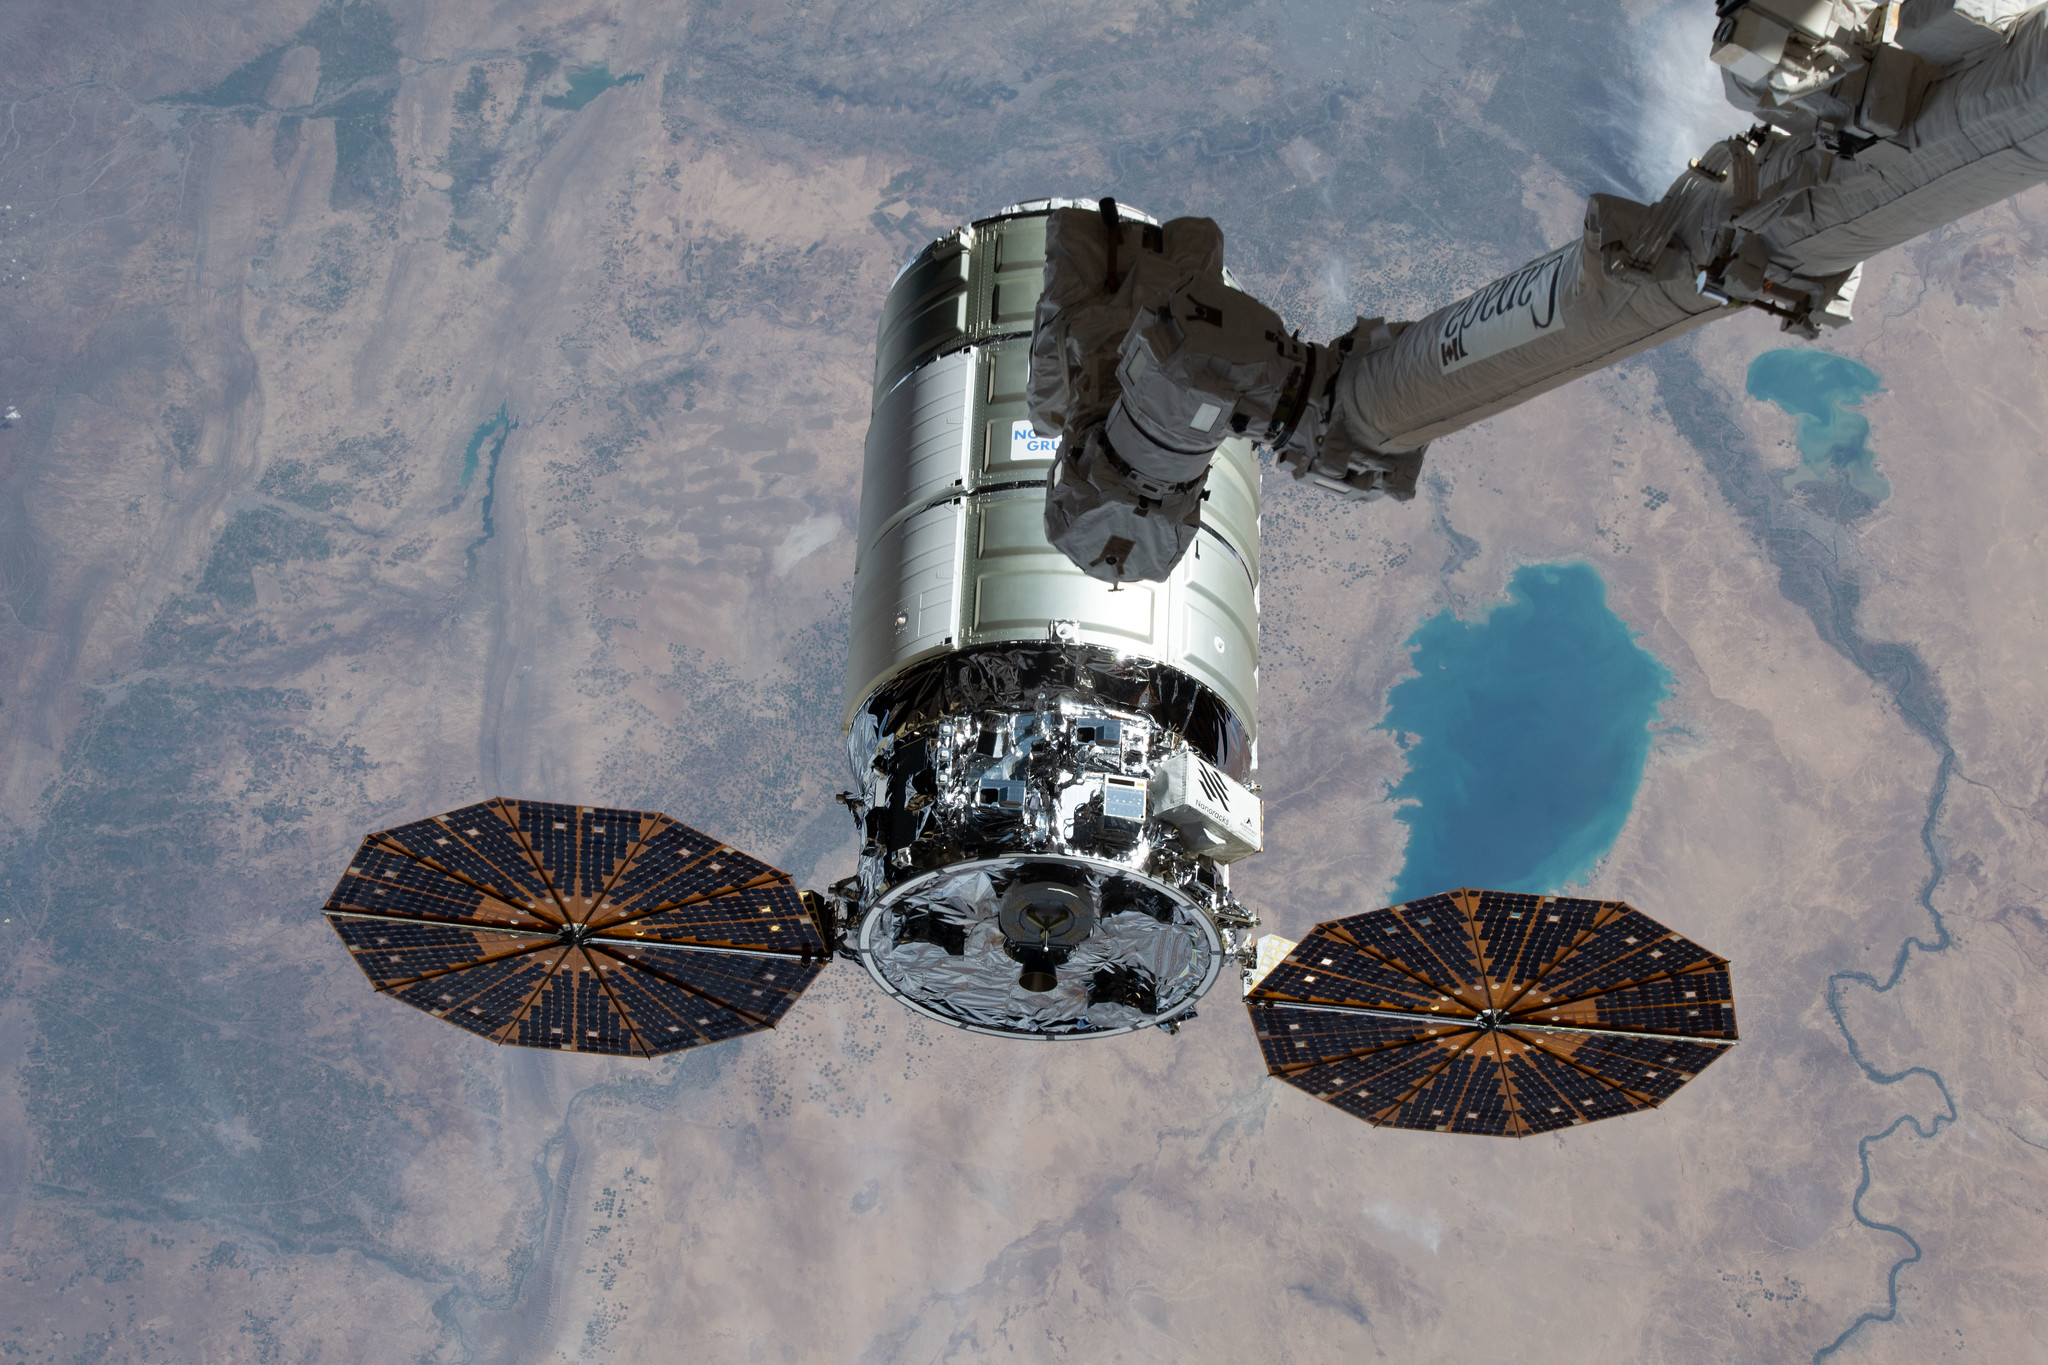 cygnus spacecraft with two solar panels with canadarm2 to attach it to the right